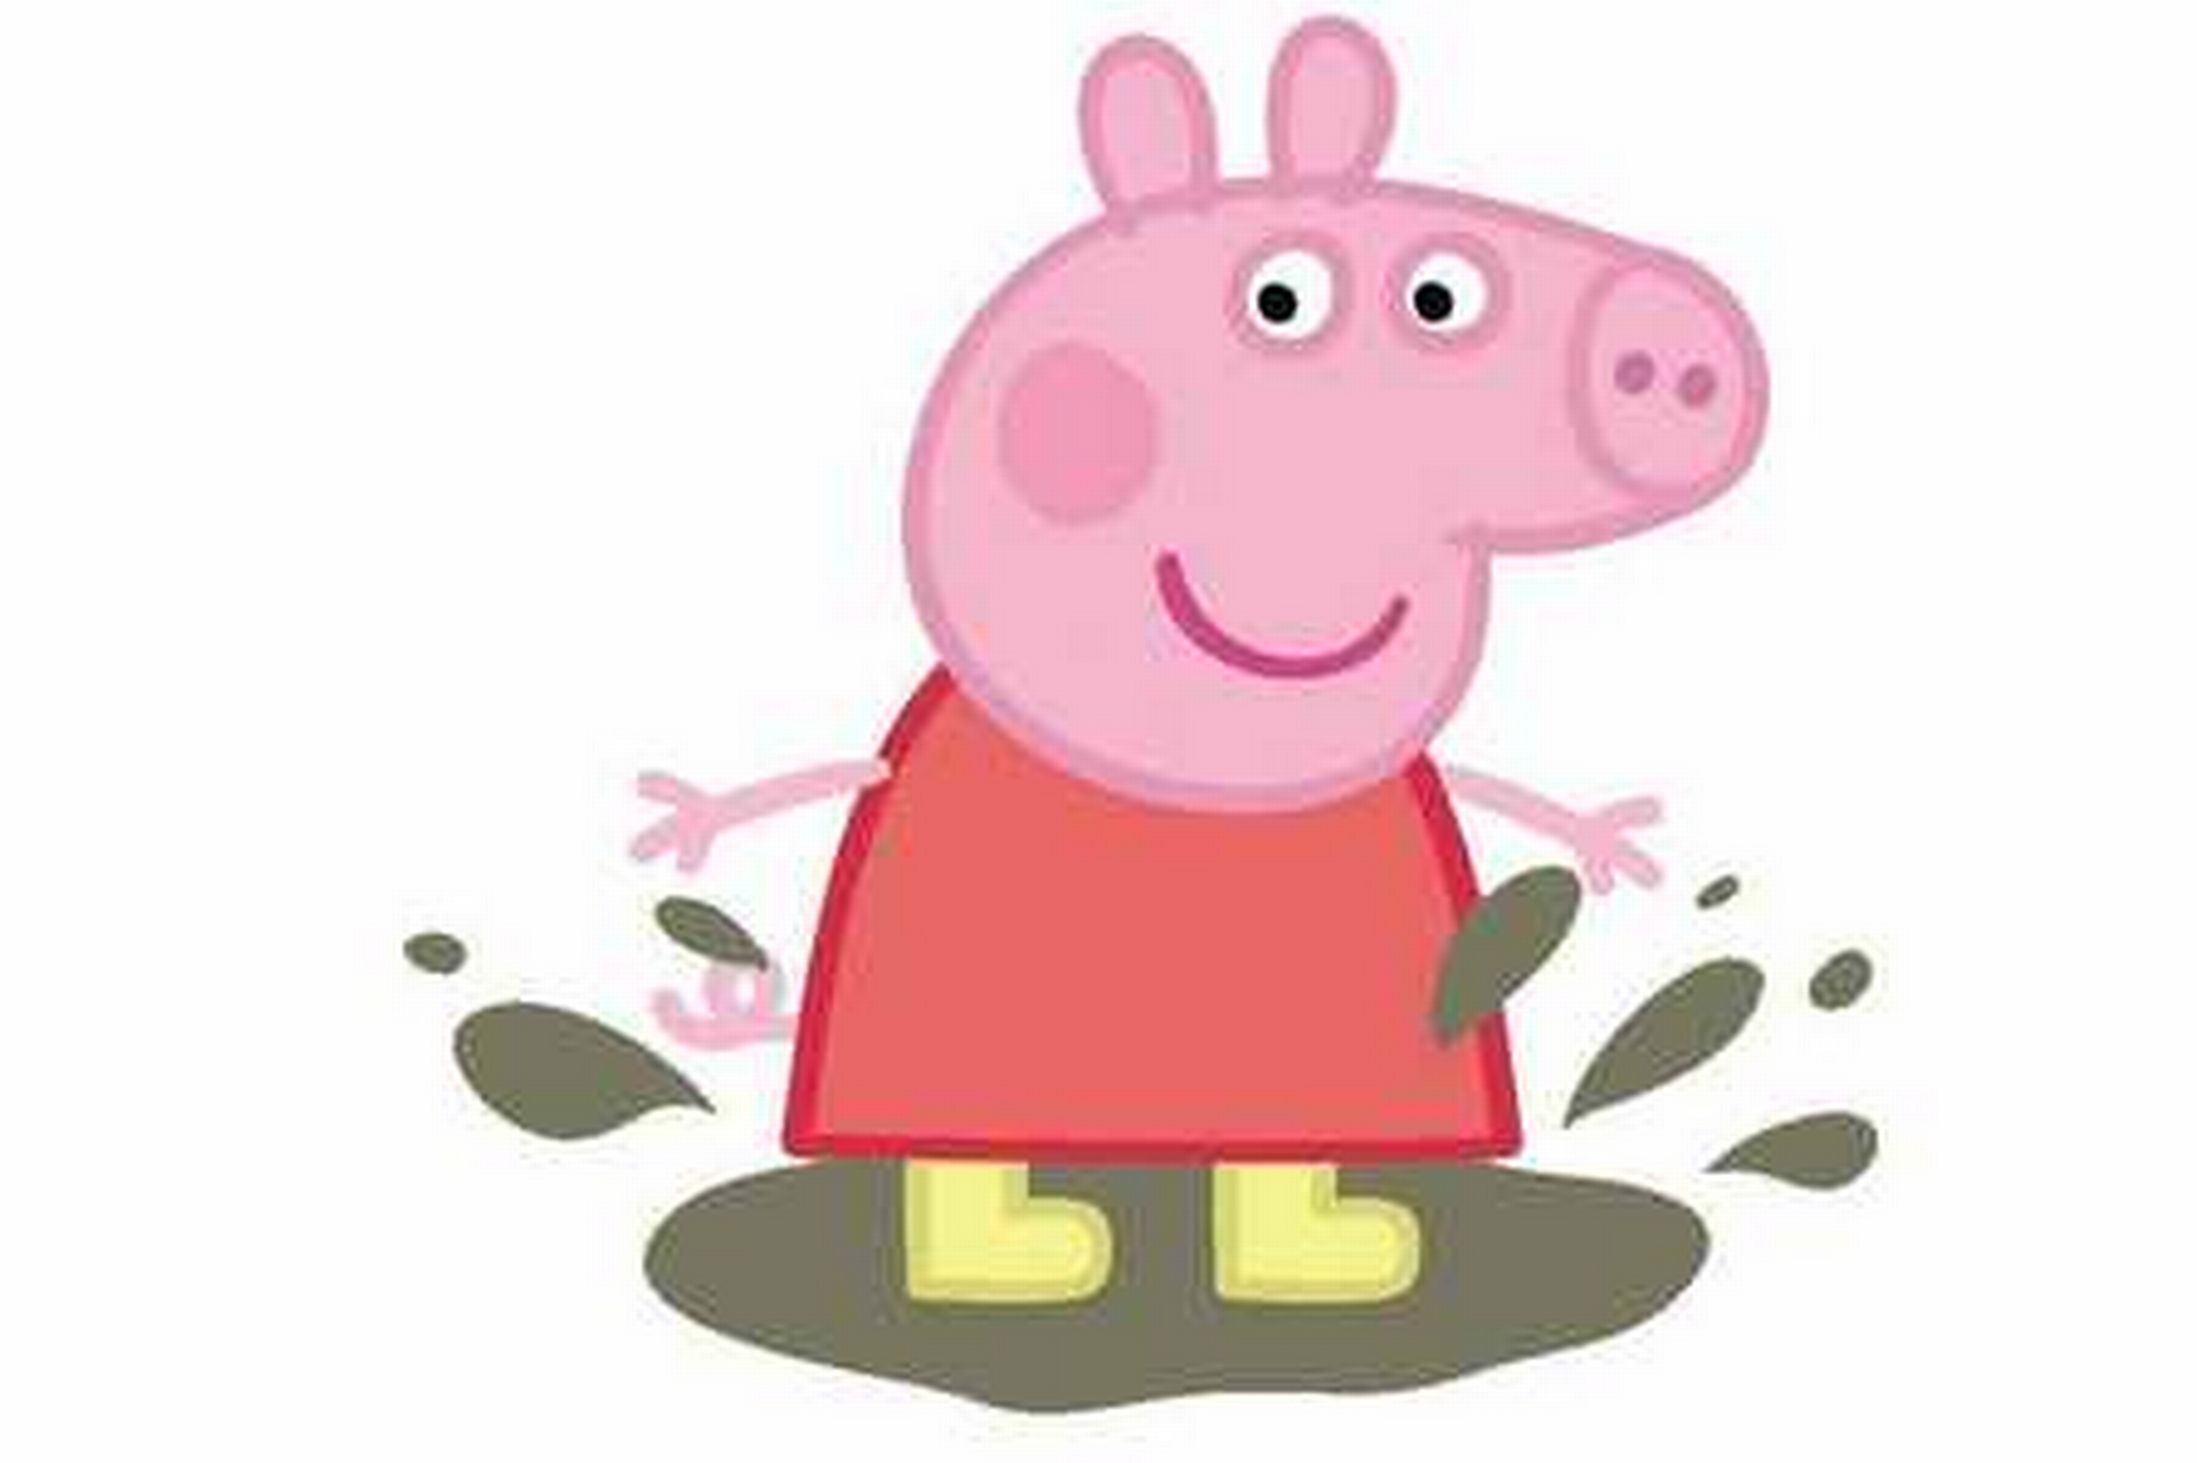 Peppa Pig Wallpapers Cartoon Hq Peppa Pig Pictures 4k Wallpapers 19